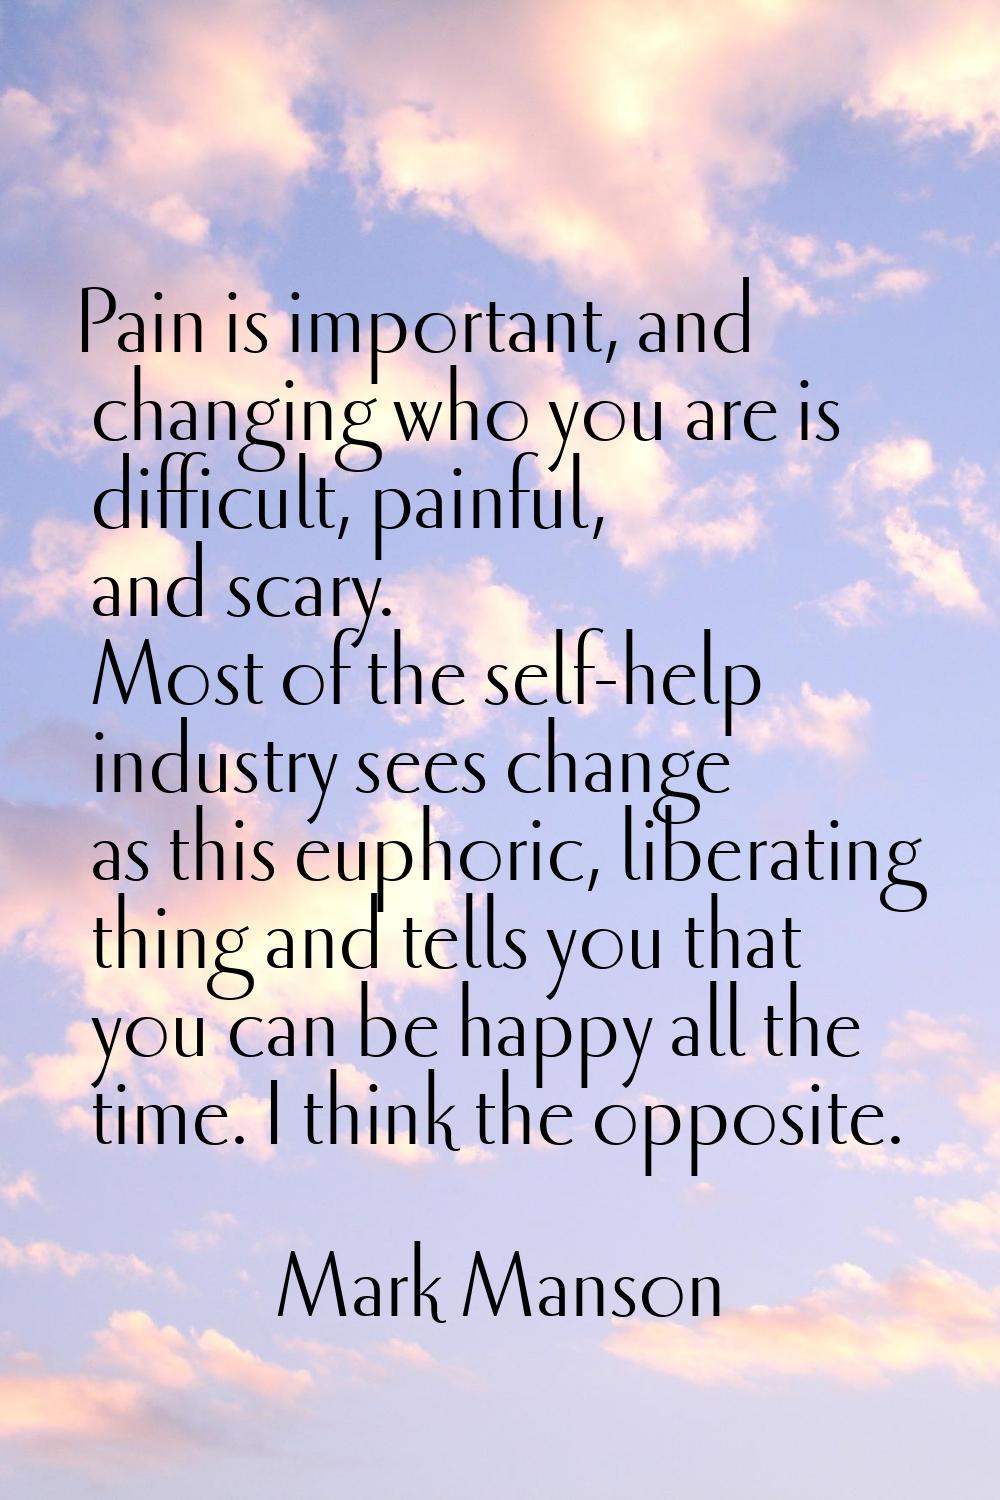 Pain is important, and changing who you are is difficult, painful, and scary. Most of the self-help